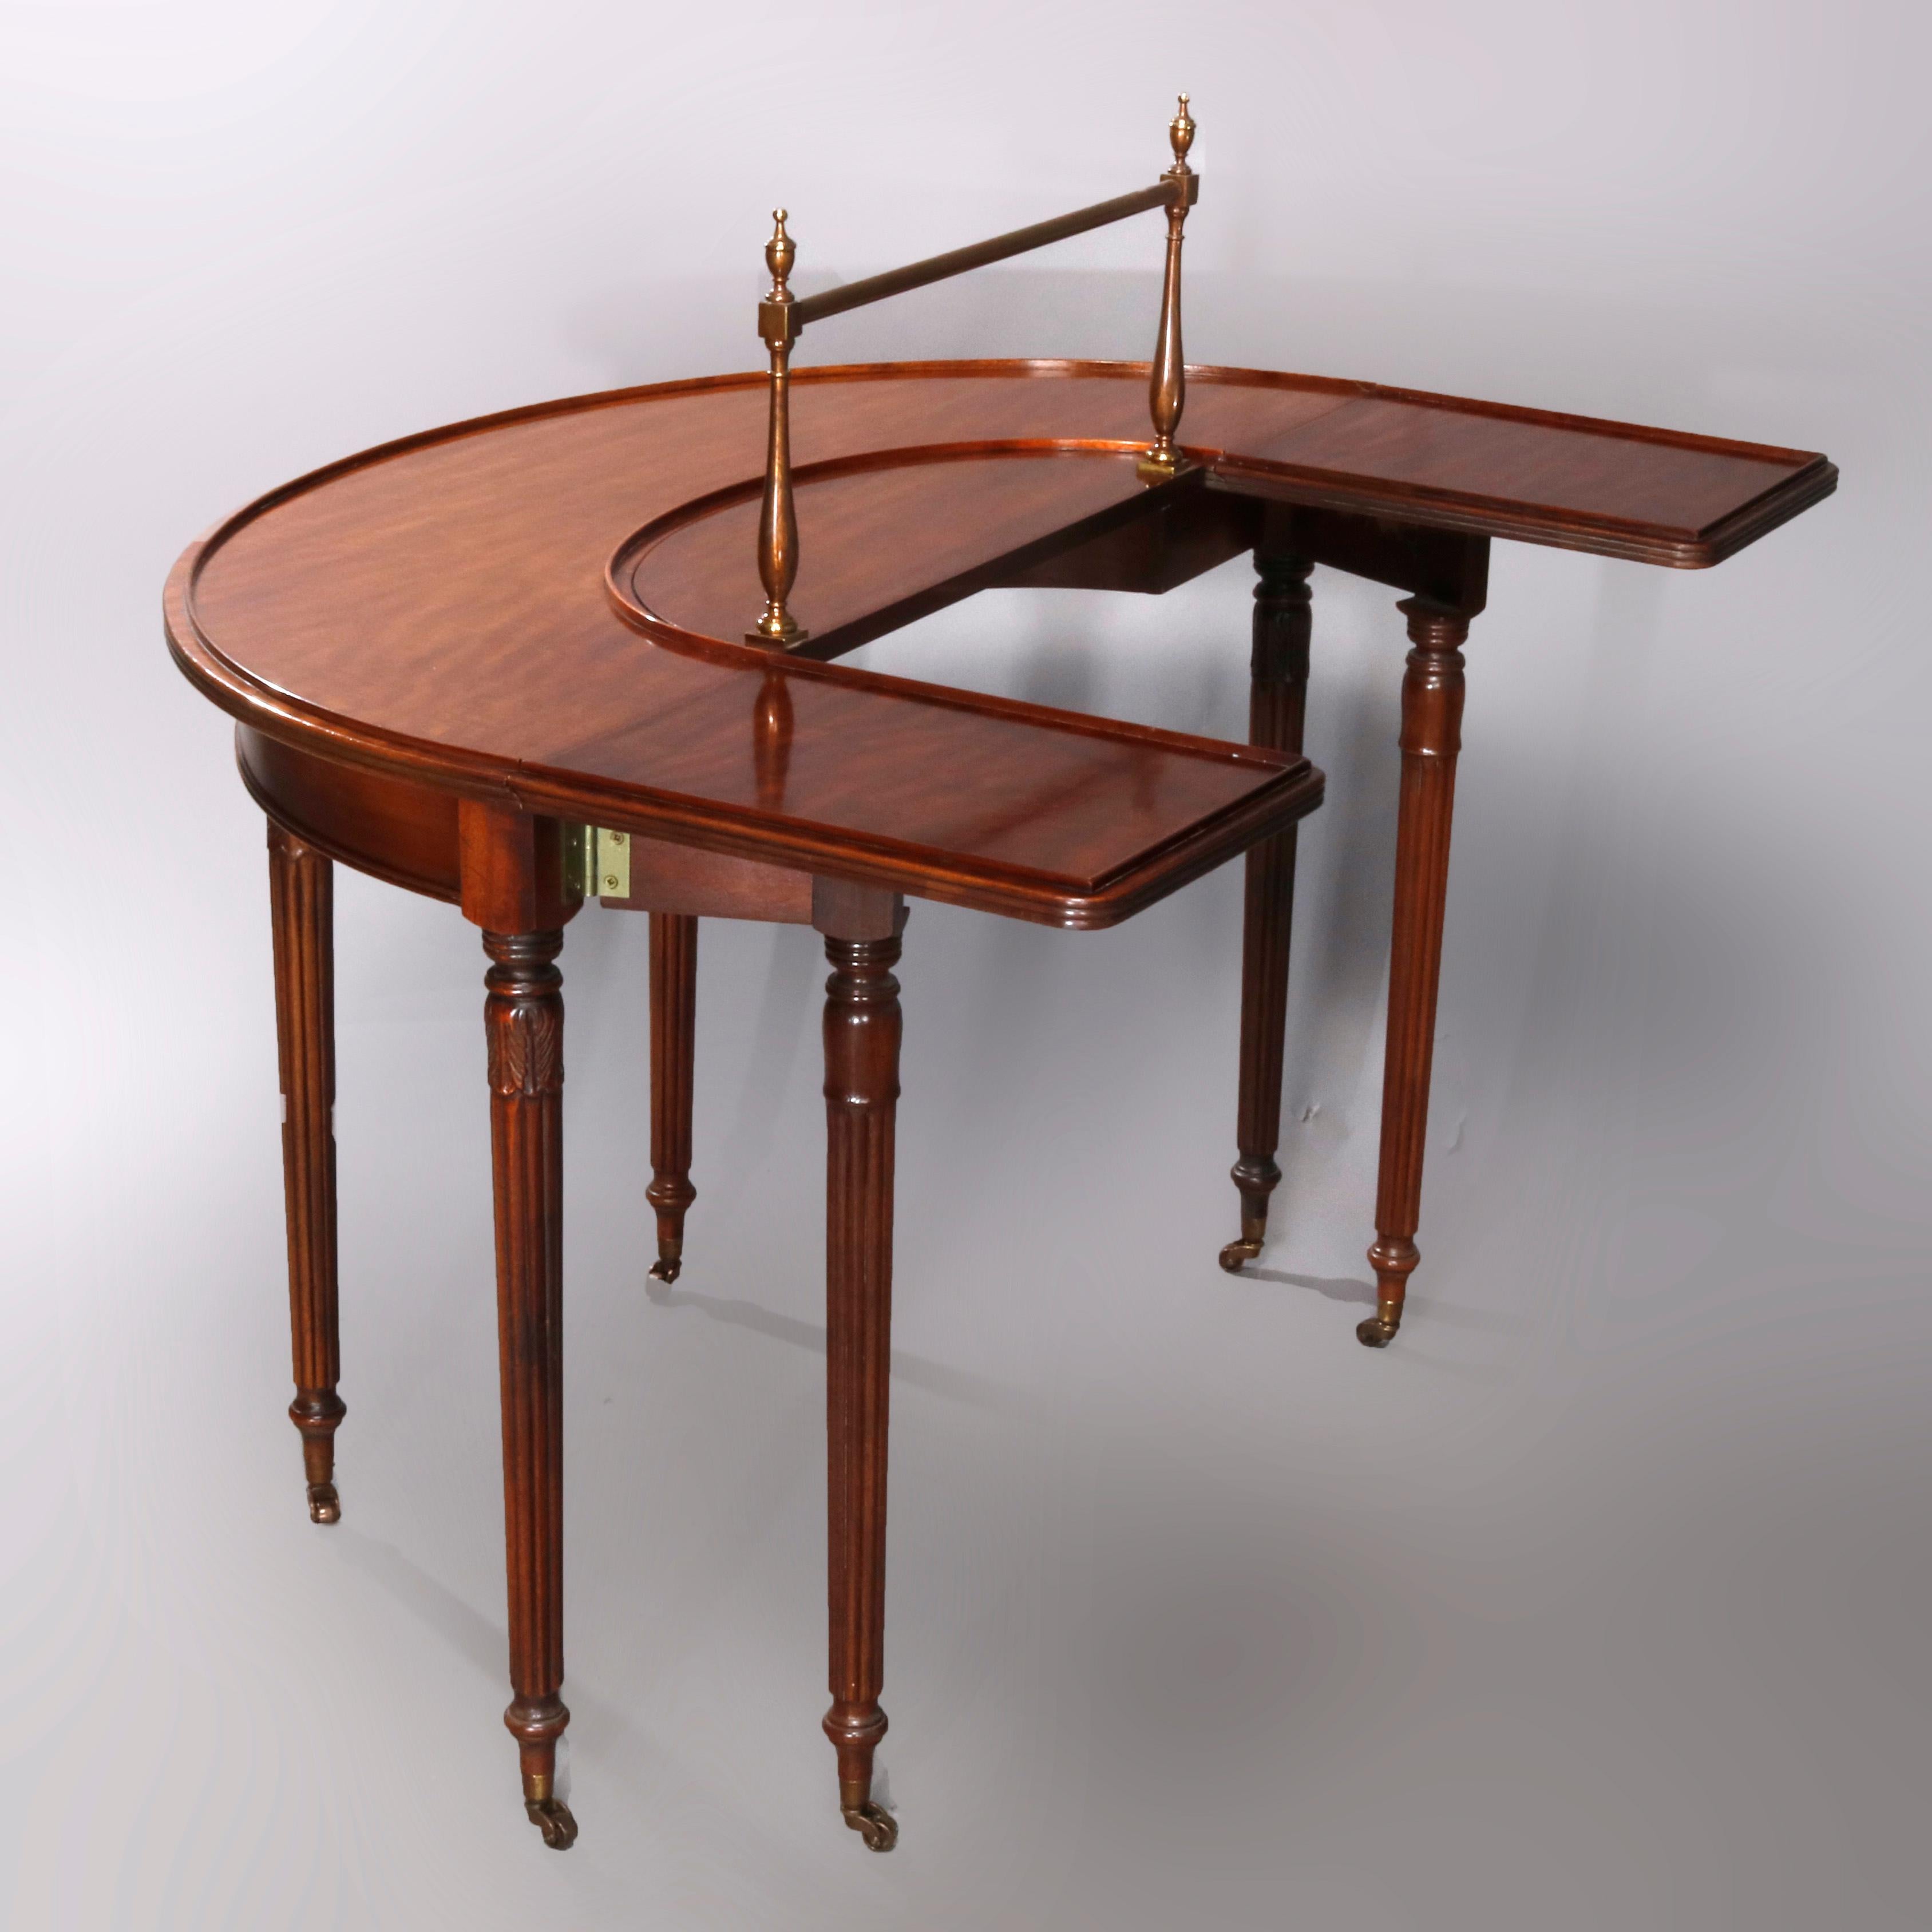 Carved Vintage Demilune Wallace Nutting Collection Serving Table by Drexel, circa 1940